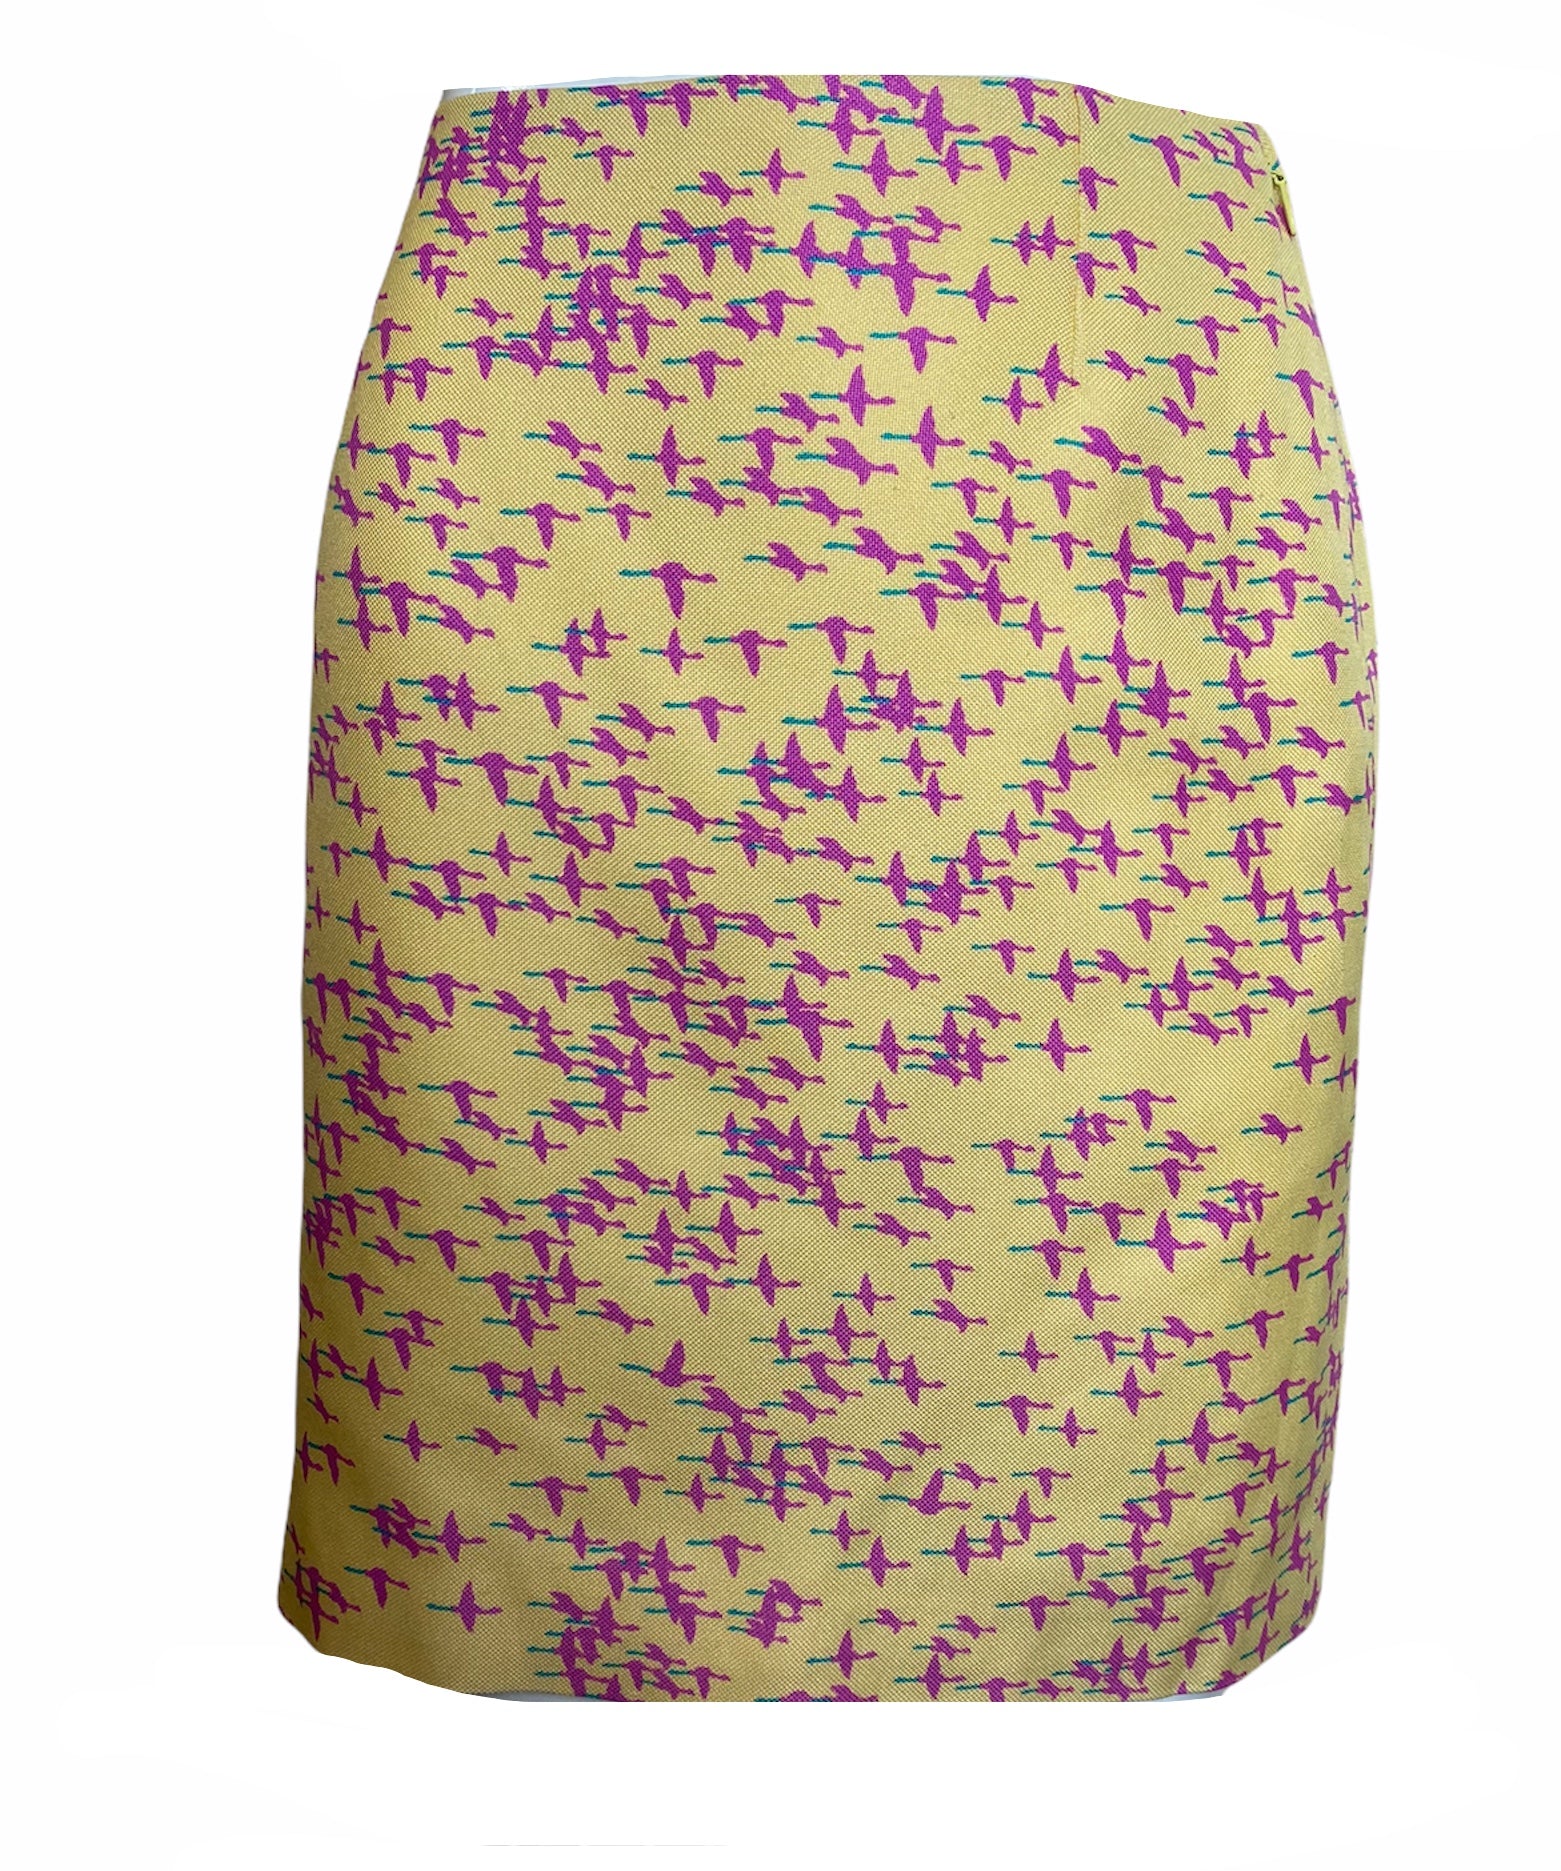 Gianni Versace 90s Yellow Geese Flying South Suit SKIRT 4 of 6